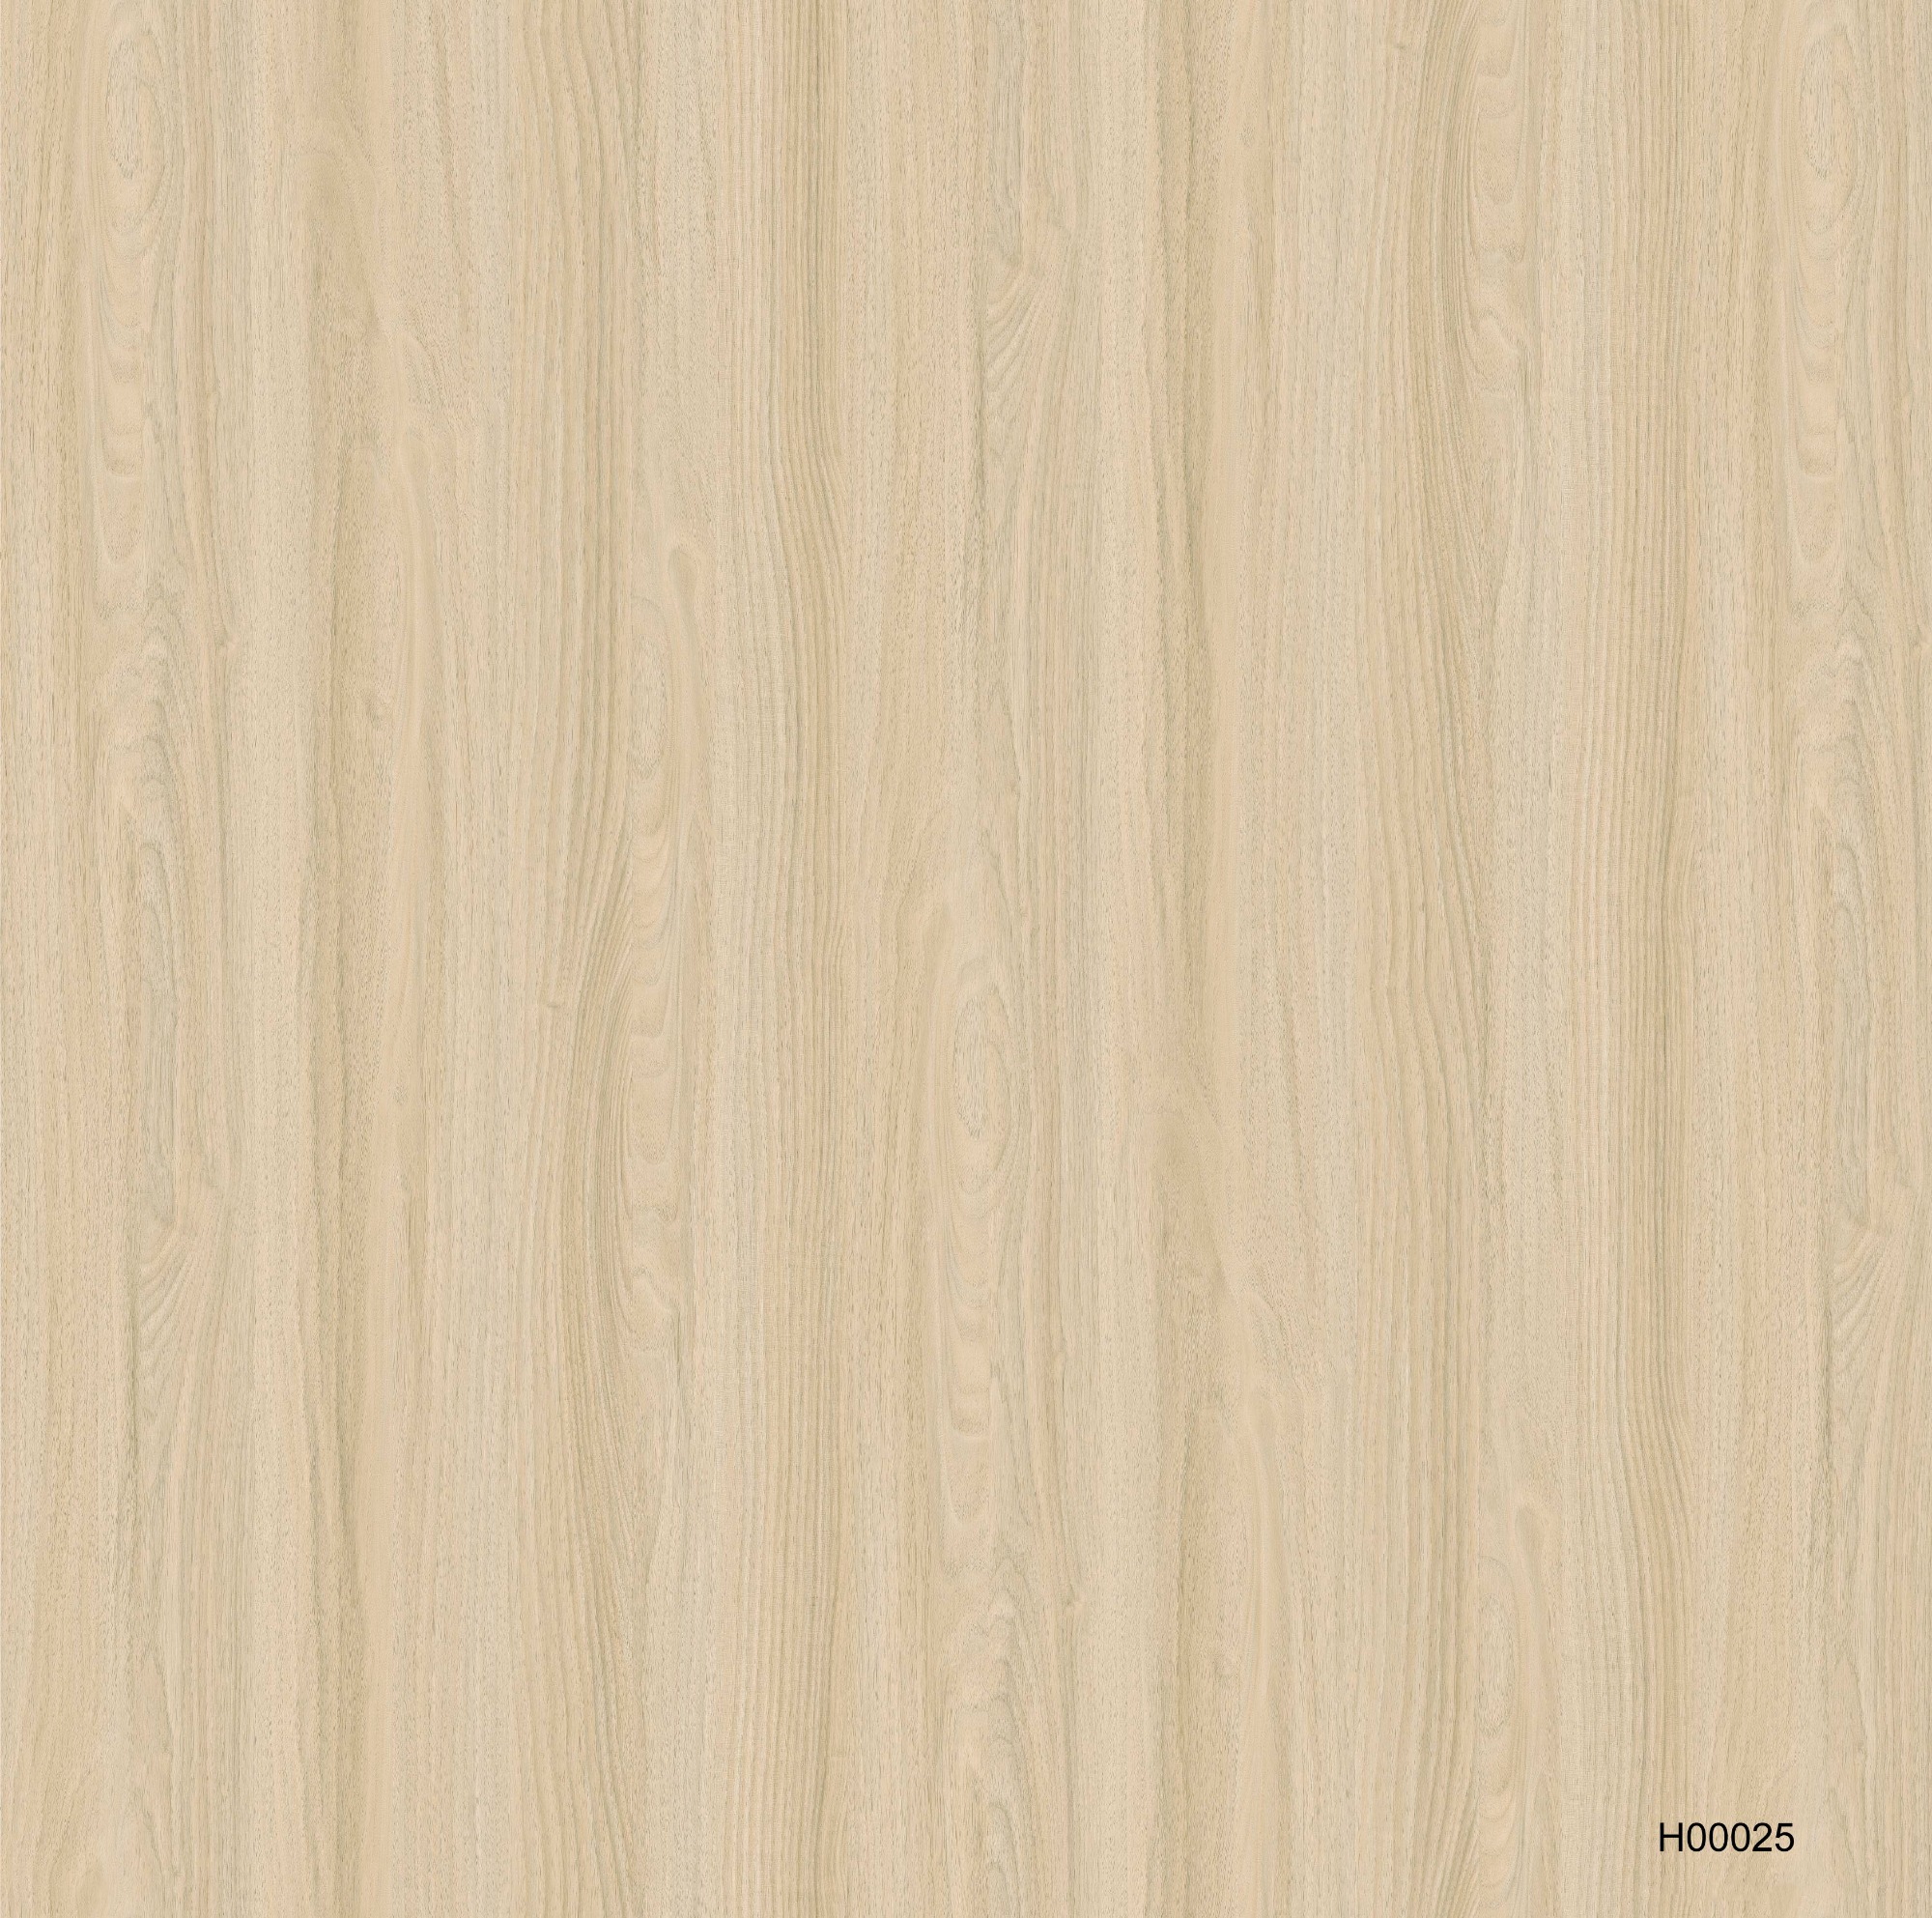 H00025 Melamine paper with wood grain